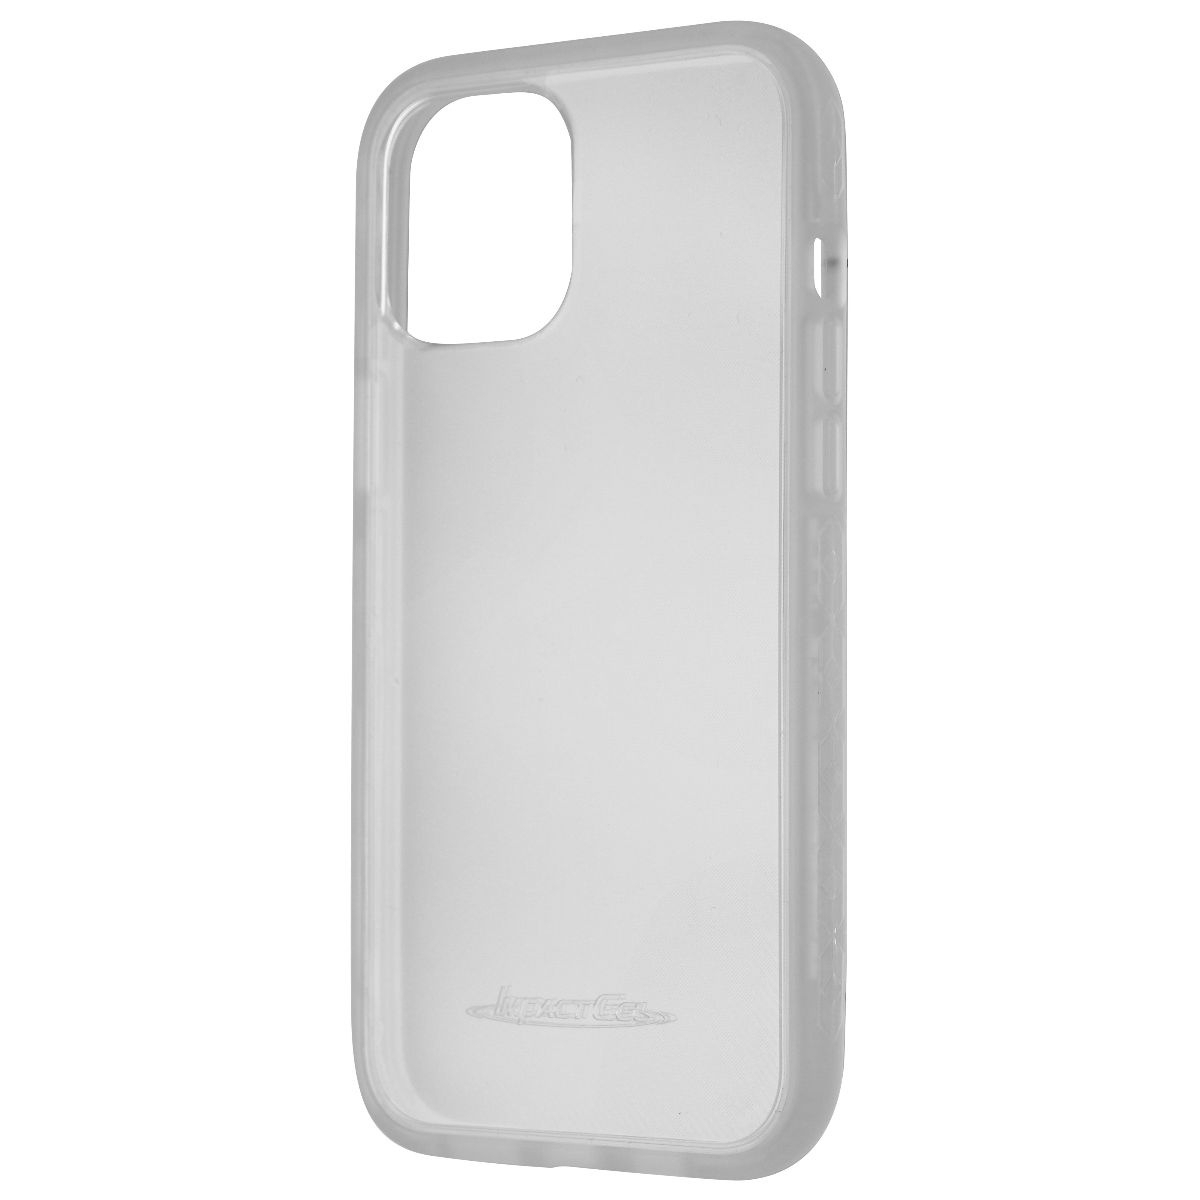 ImpactGel Chroma Series Case For Apple IPhone 12 Pro Max - Clear/Frost